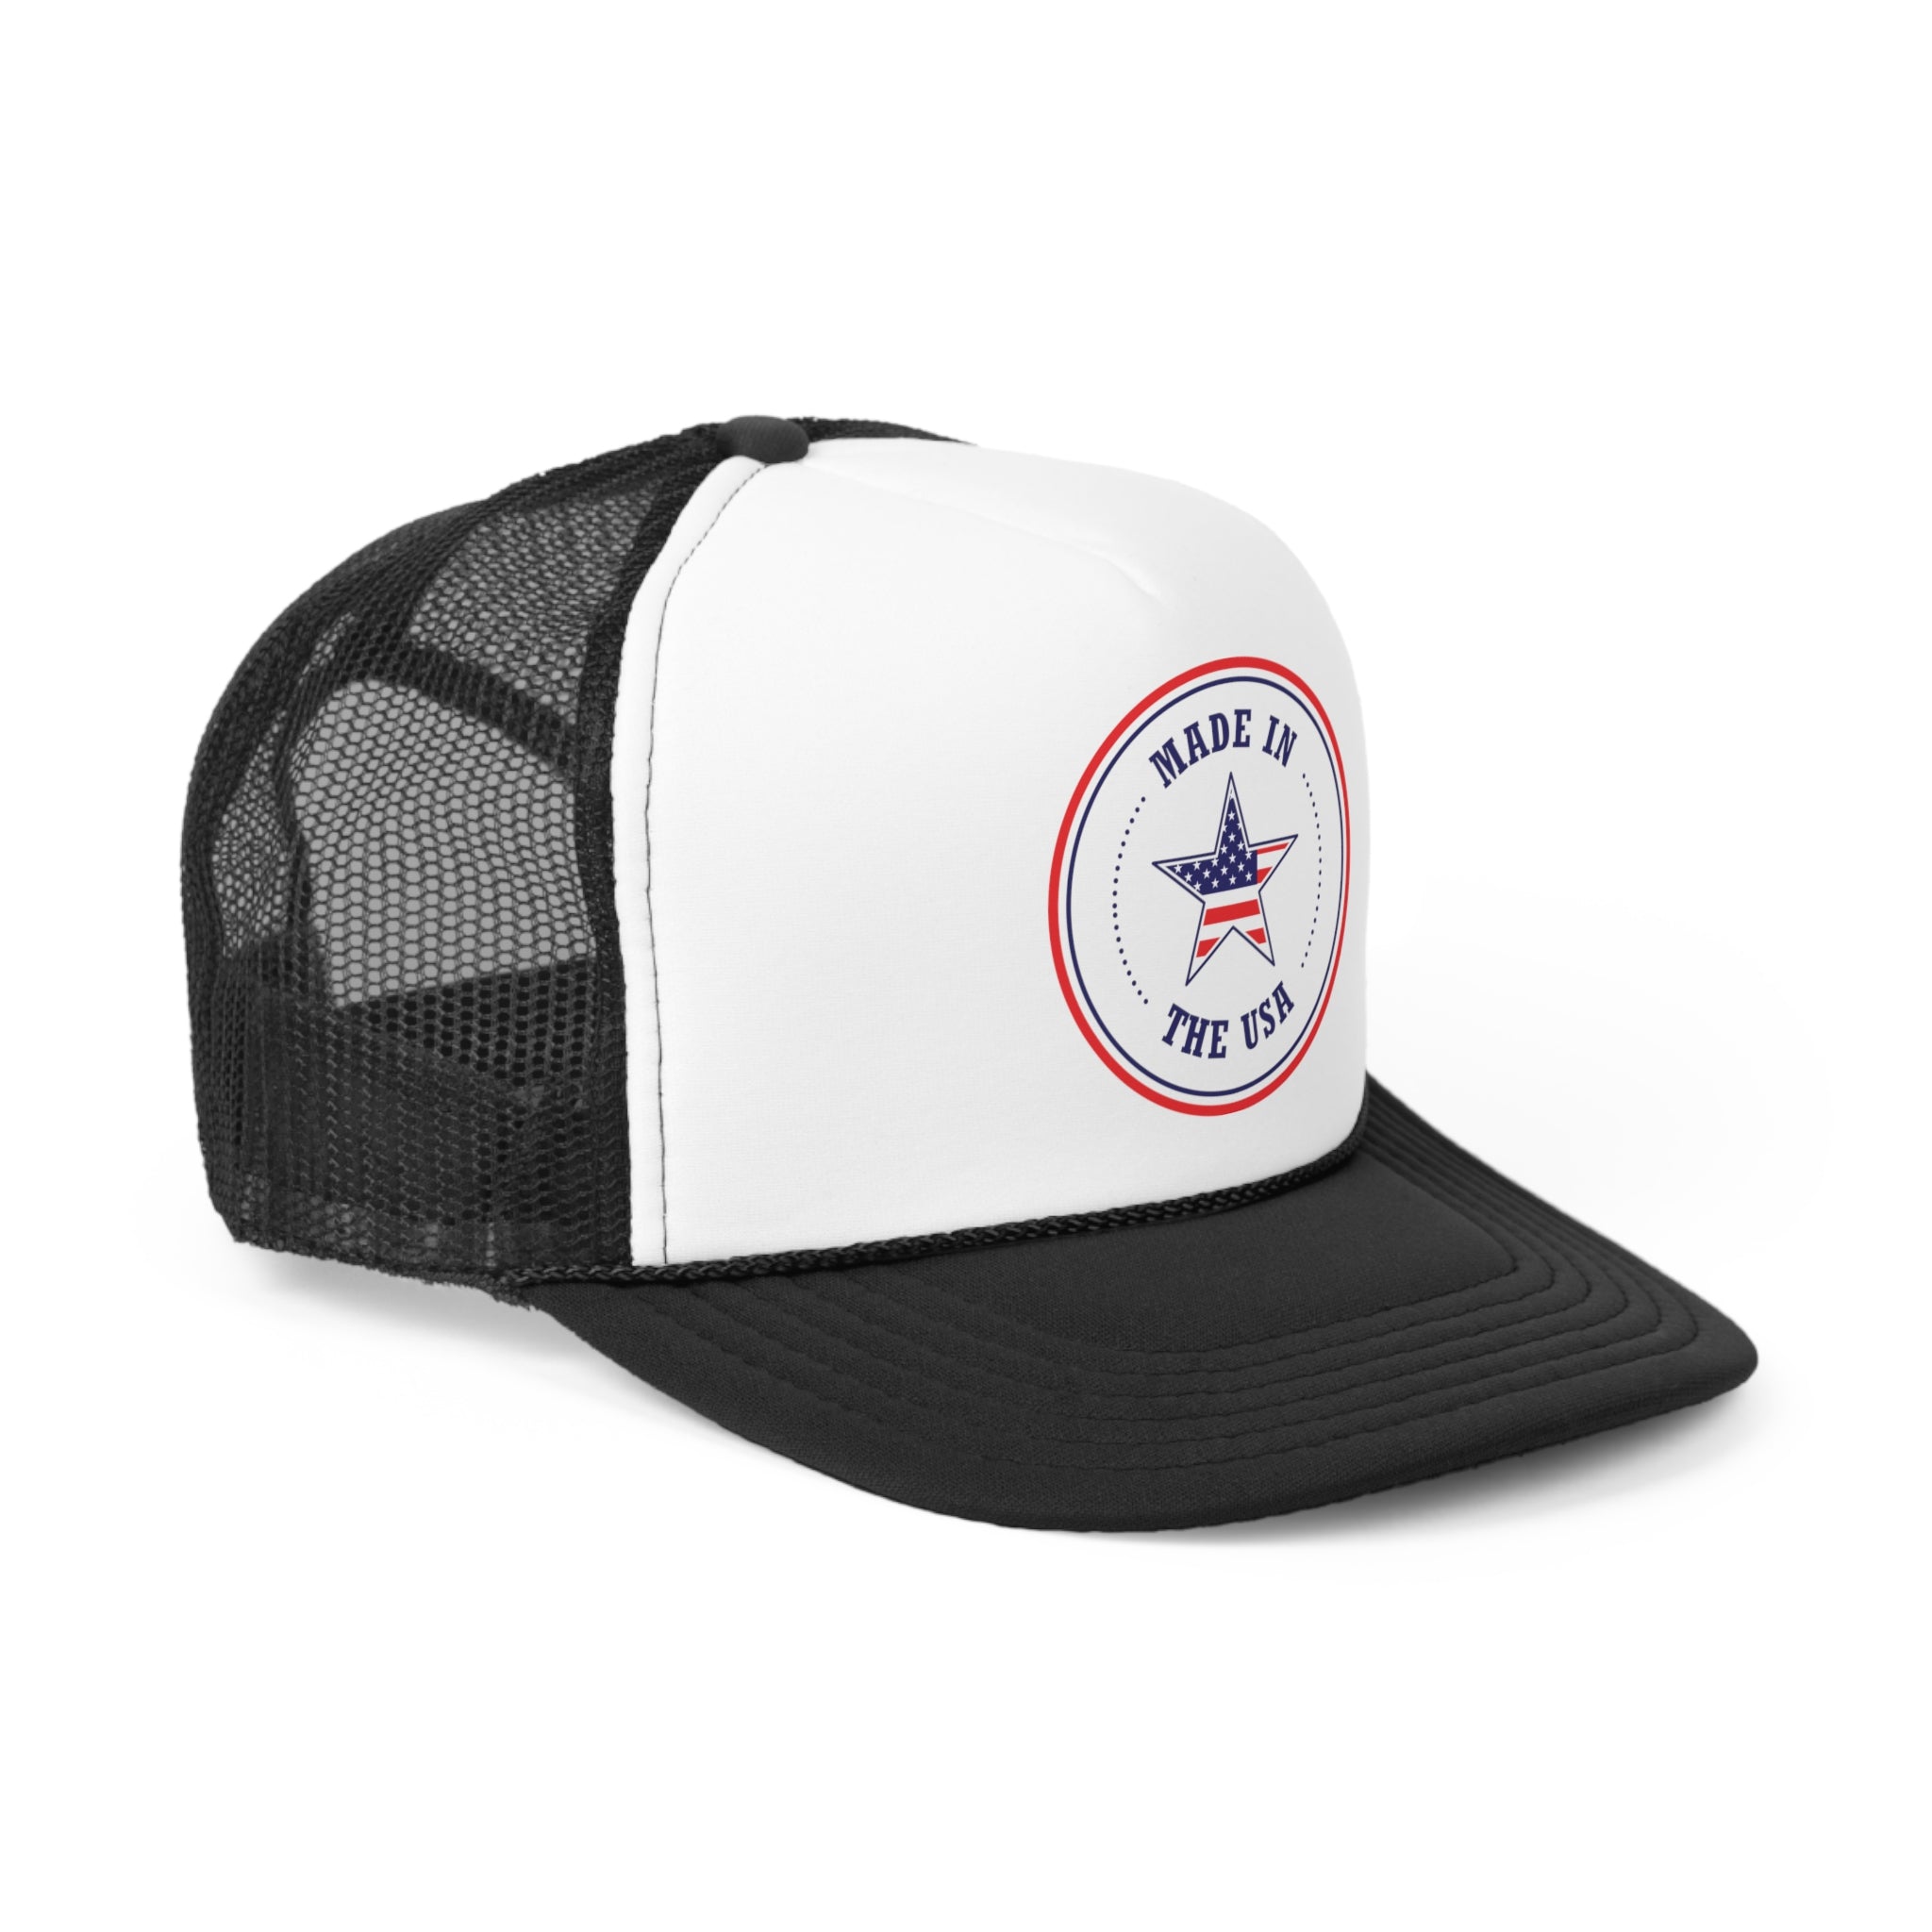 Made in the USA Trucker Cap